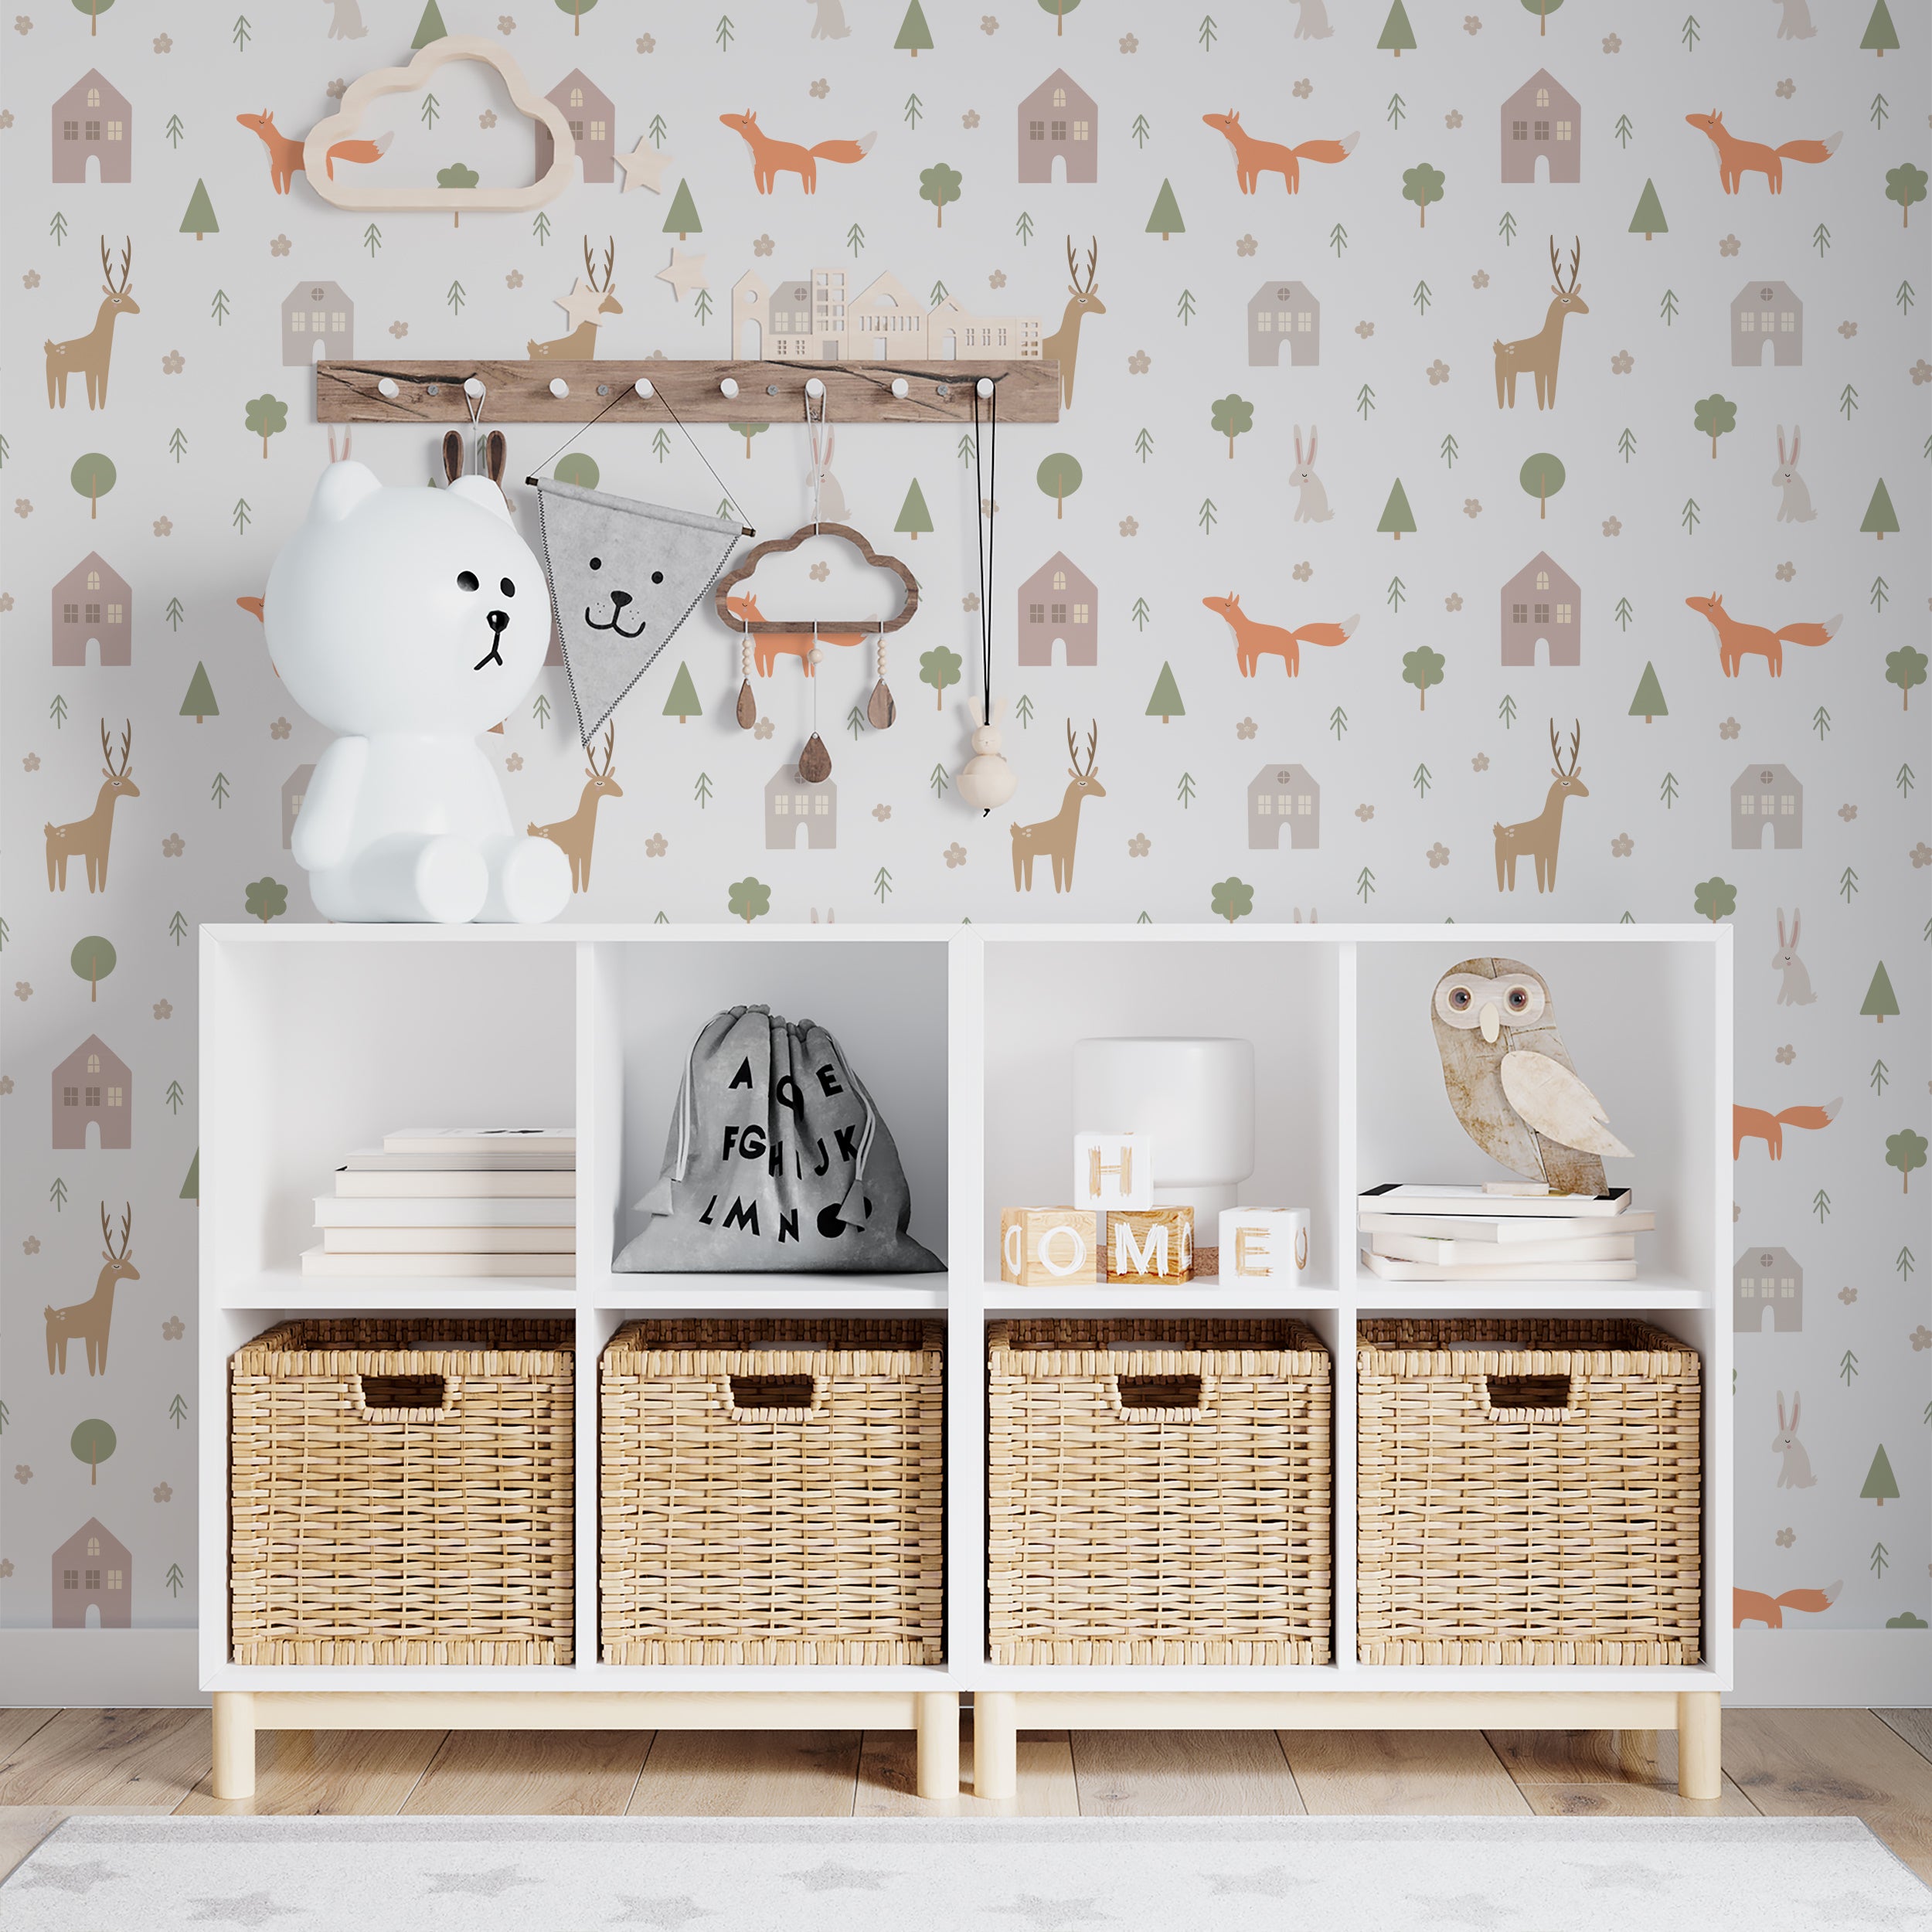 Children's room decorated with Stag and Fox Wallpaper enhancing the playful and whimsical atmosphere. The wallpaper includes motifs of stags, foxes, and forest elements, complementing the room's natural wood furniture and playful toys.